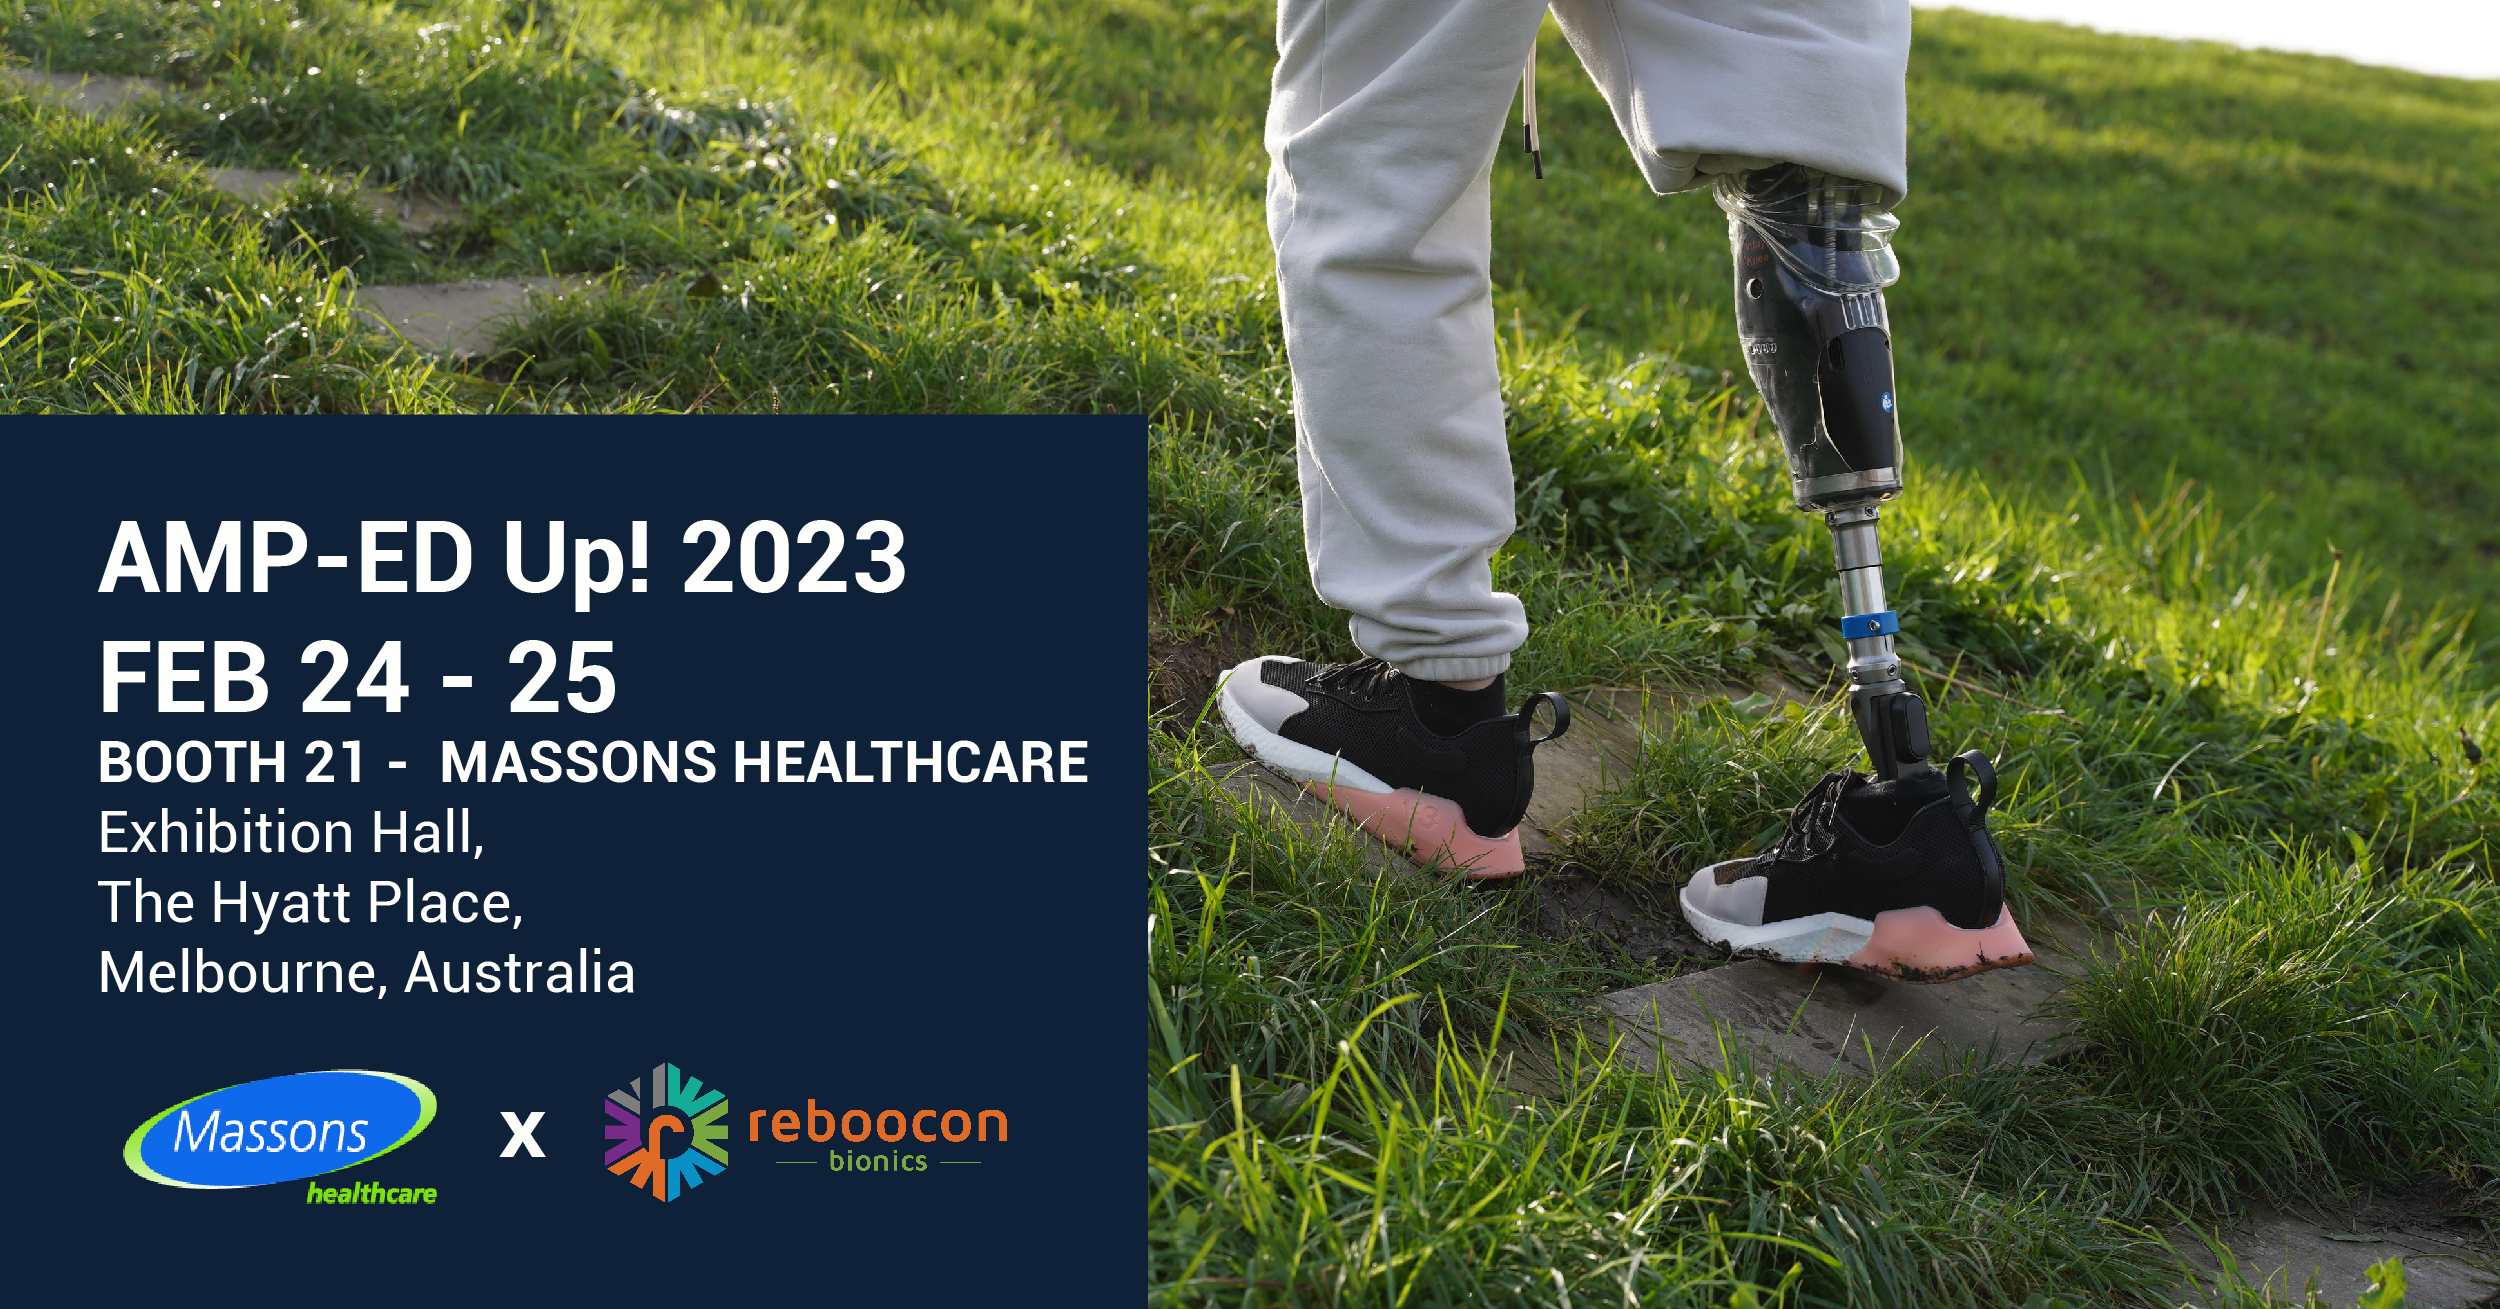 Joining Massons Healthcare at Limbs4Life AMP-ED Up! 2023 conference in Melbourne